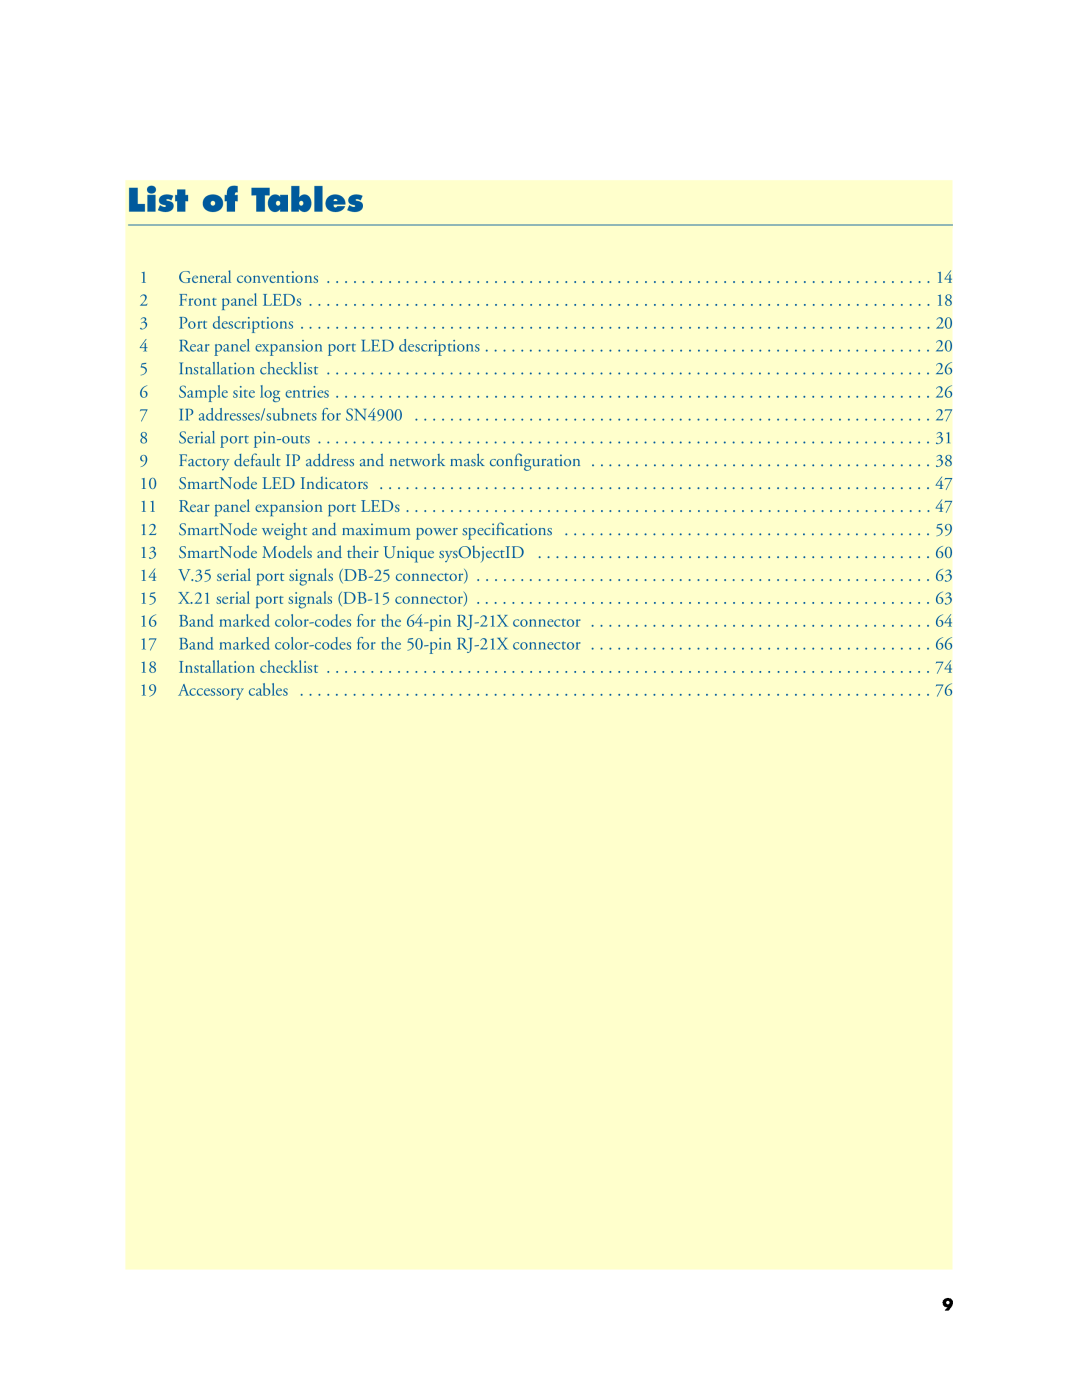 Patton electronic 4900 user manual List of Tables 